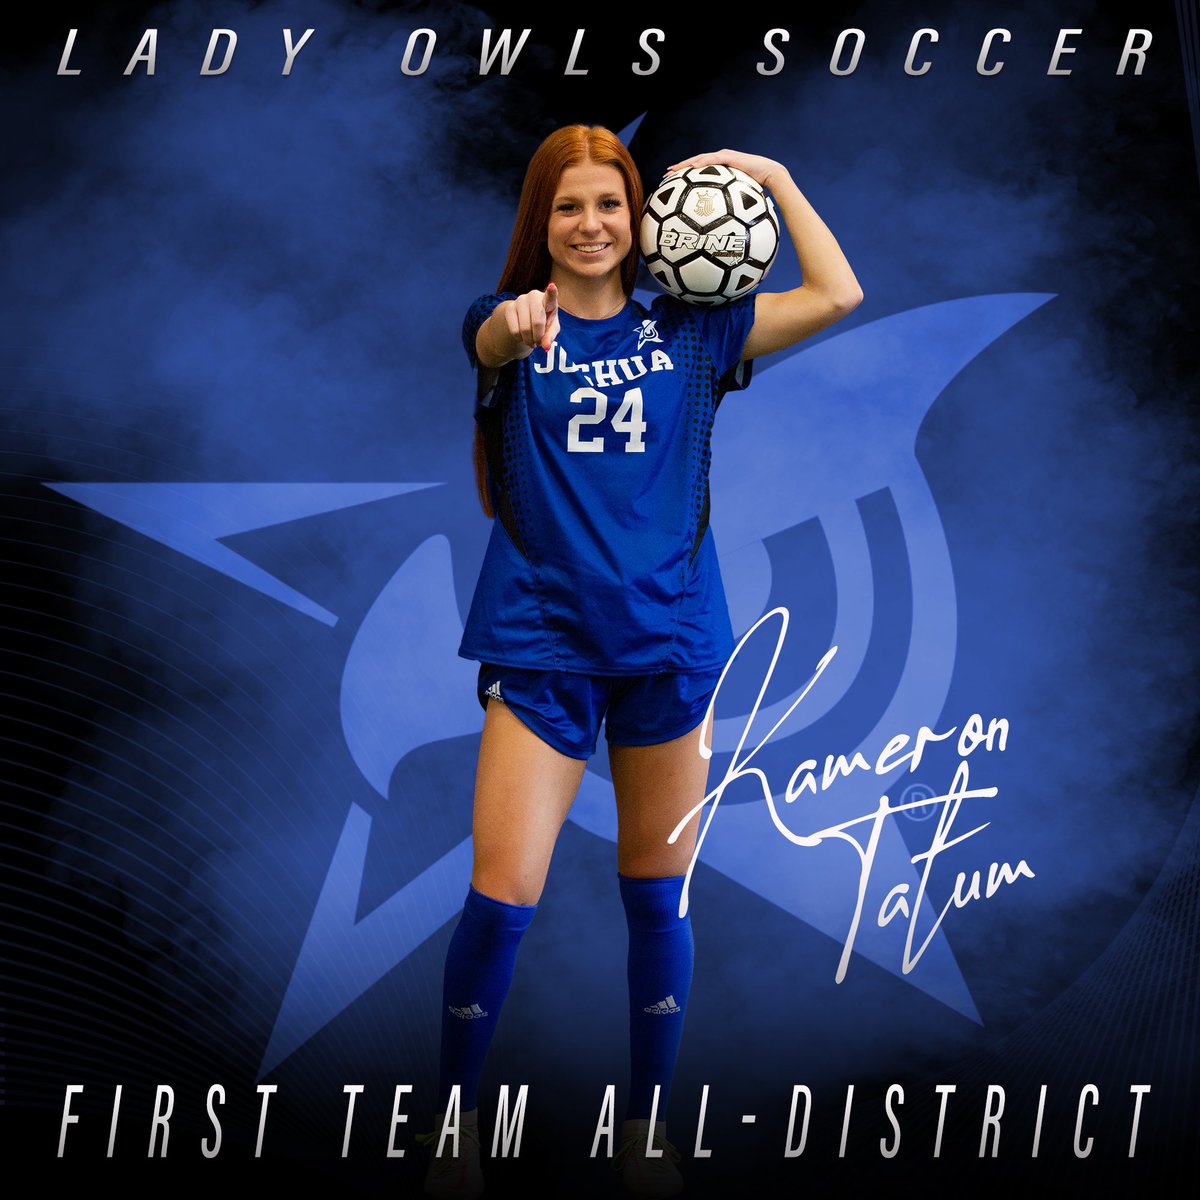 First Team All-District 💙⚽️💙